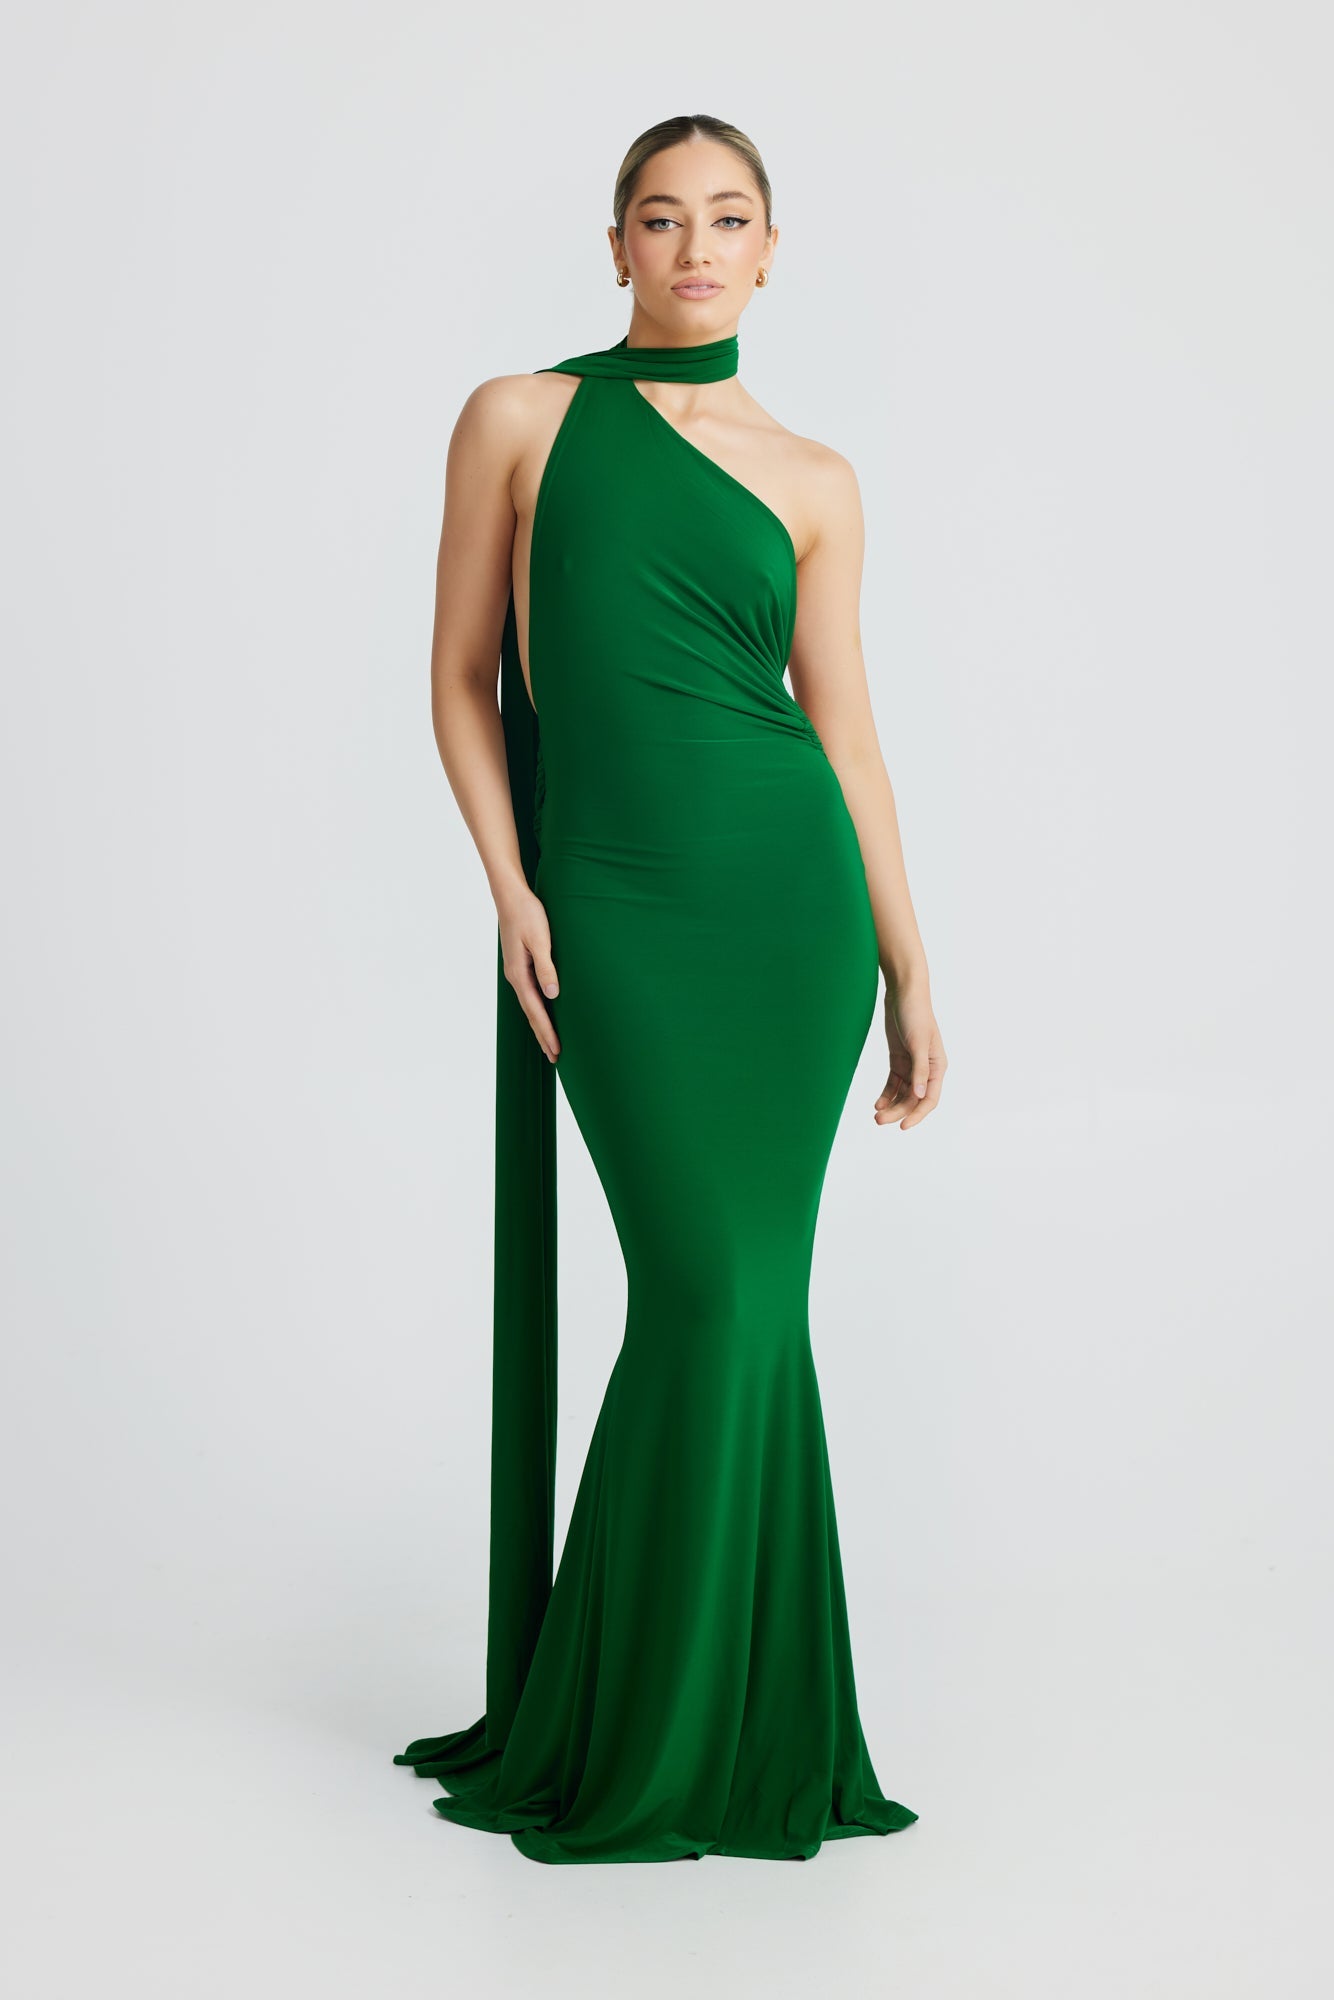 MÉLANI The Label SOFIA Green Asymmetric Backless Form Fitted Dress